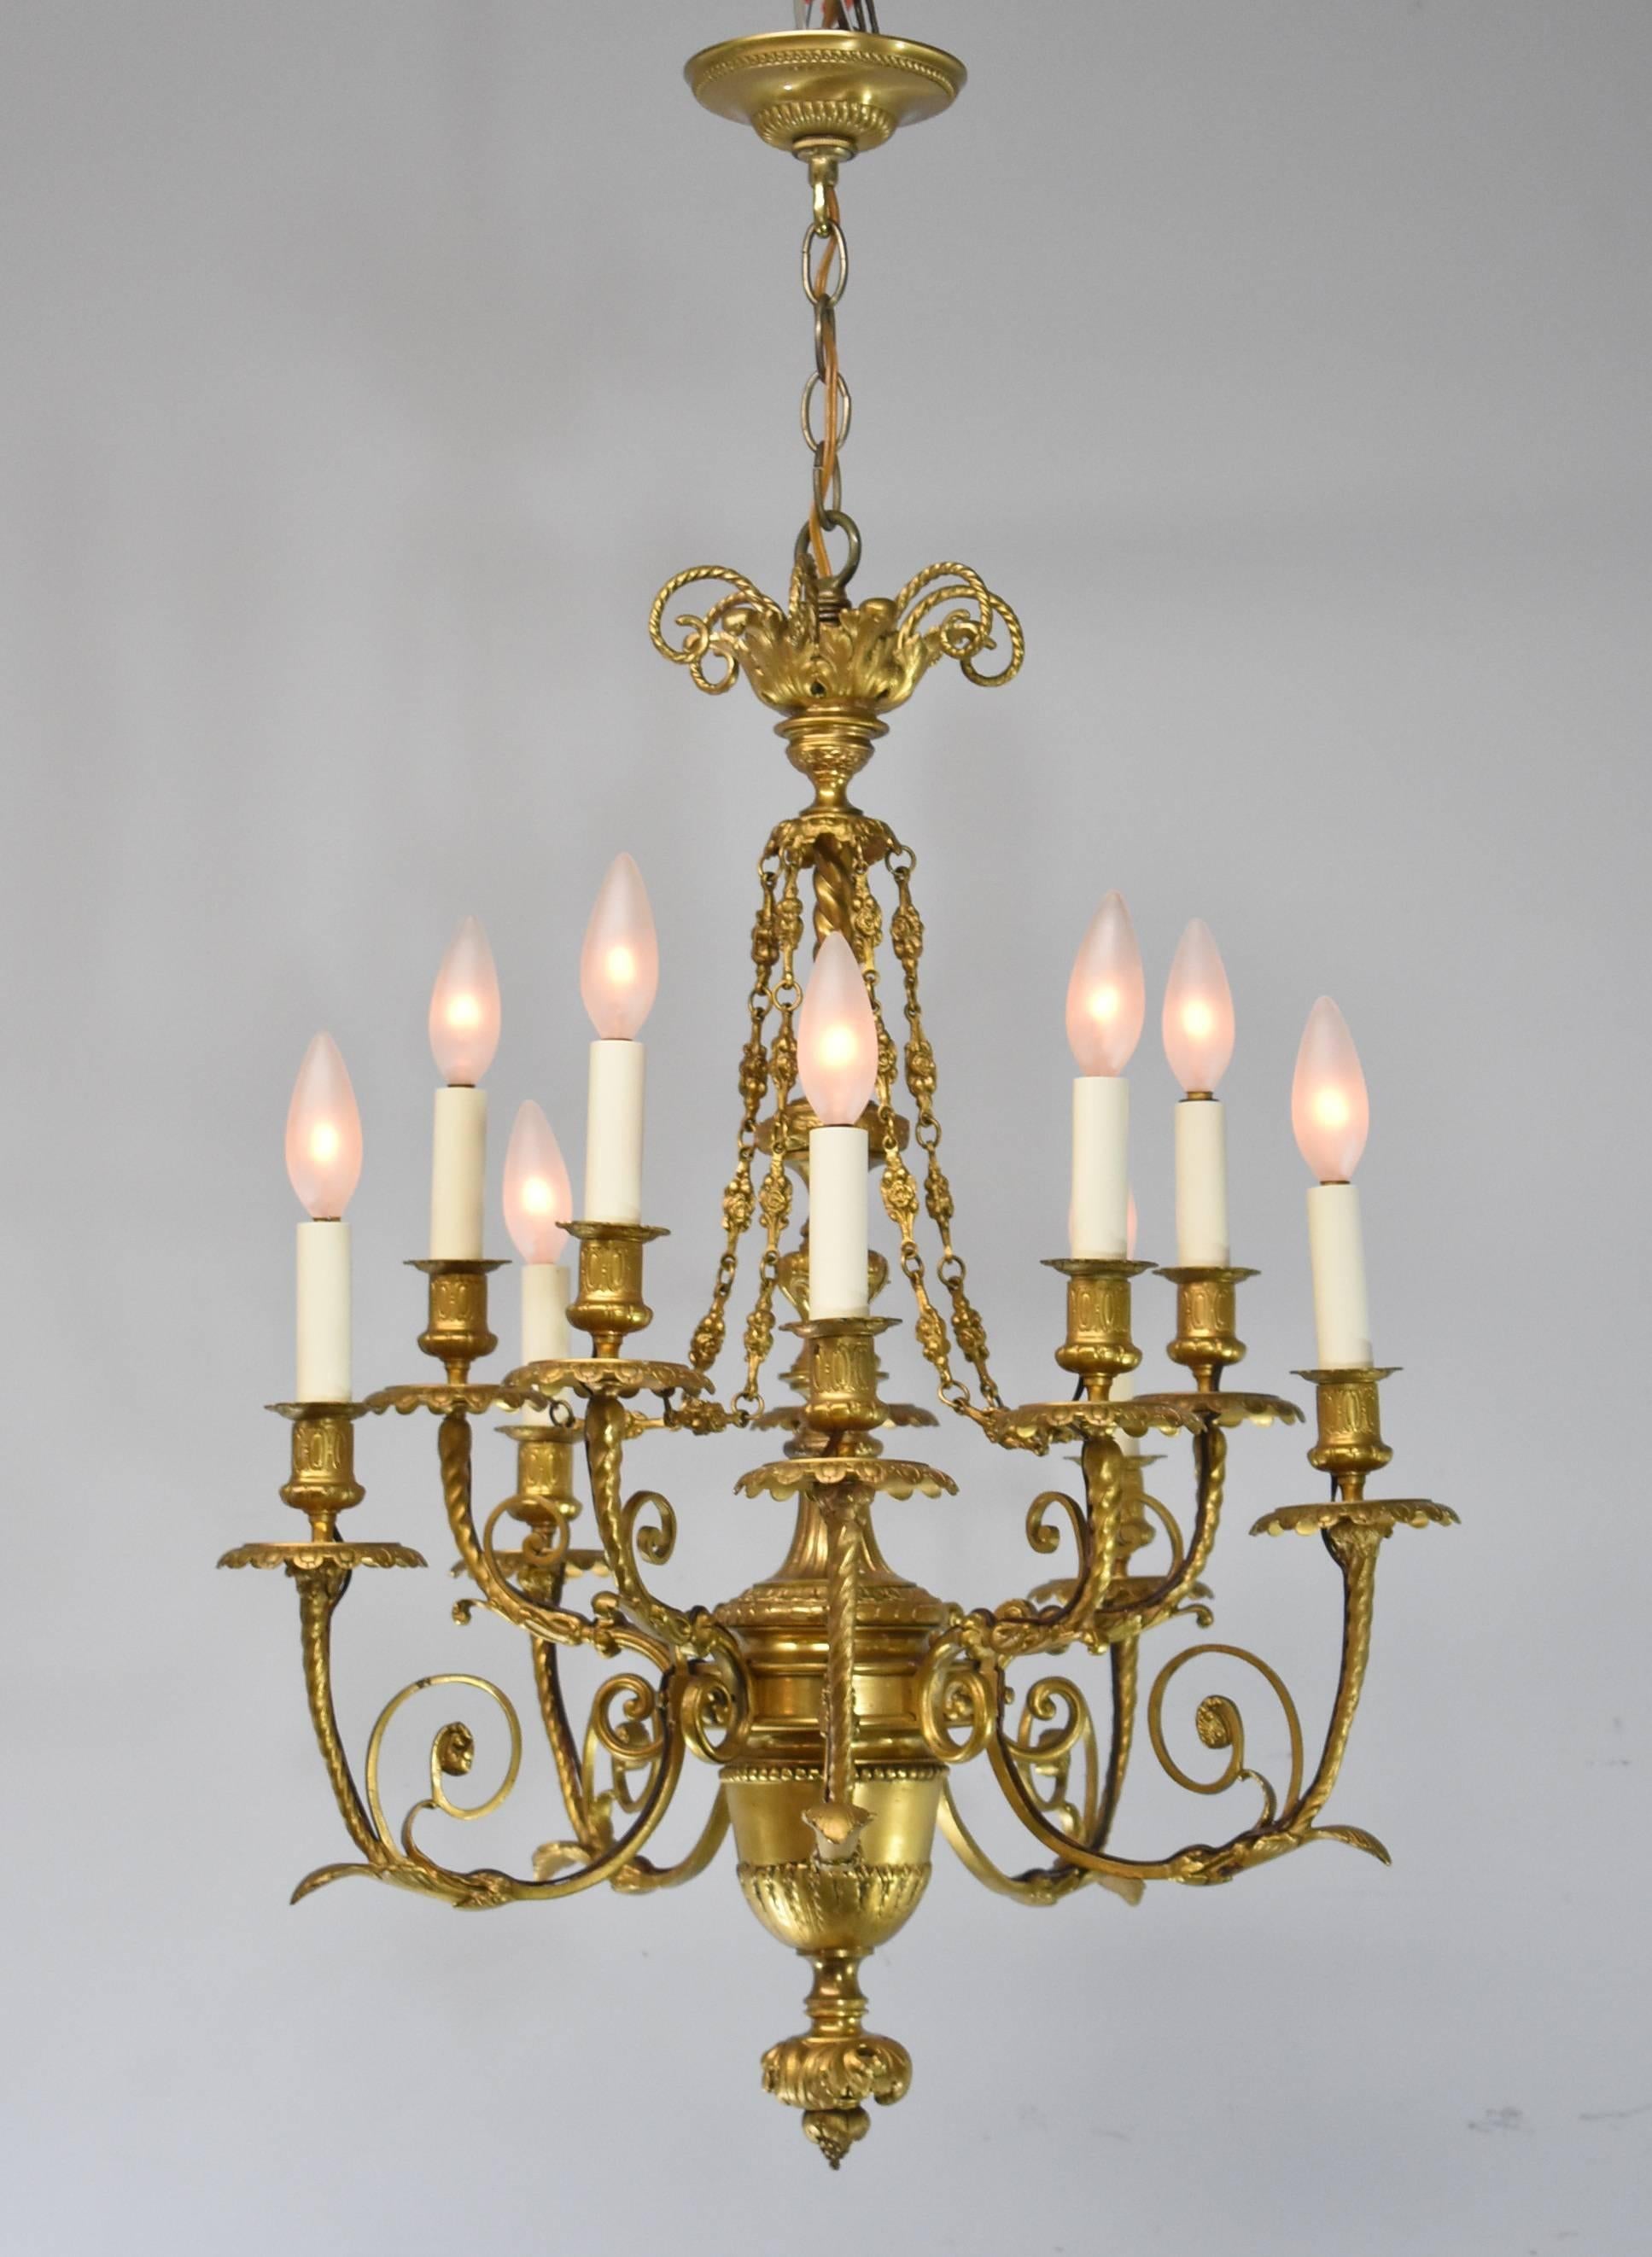 Impressive French style ten-arm chandelier in bronze with a gold doré finish. Ornate swag and rose details on the chain. Shades are not included.